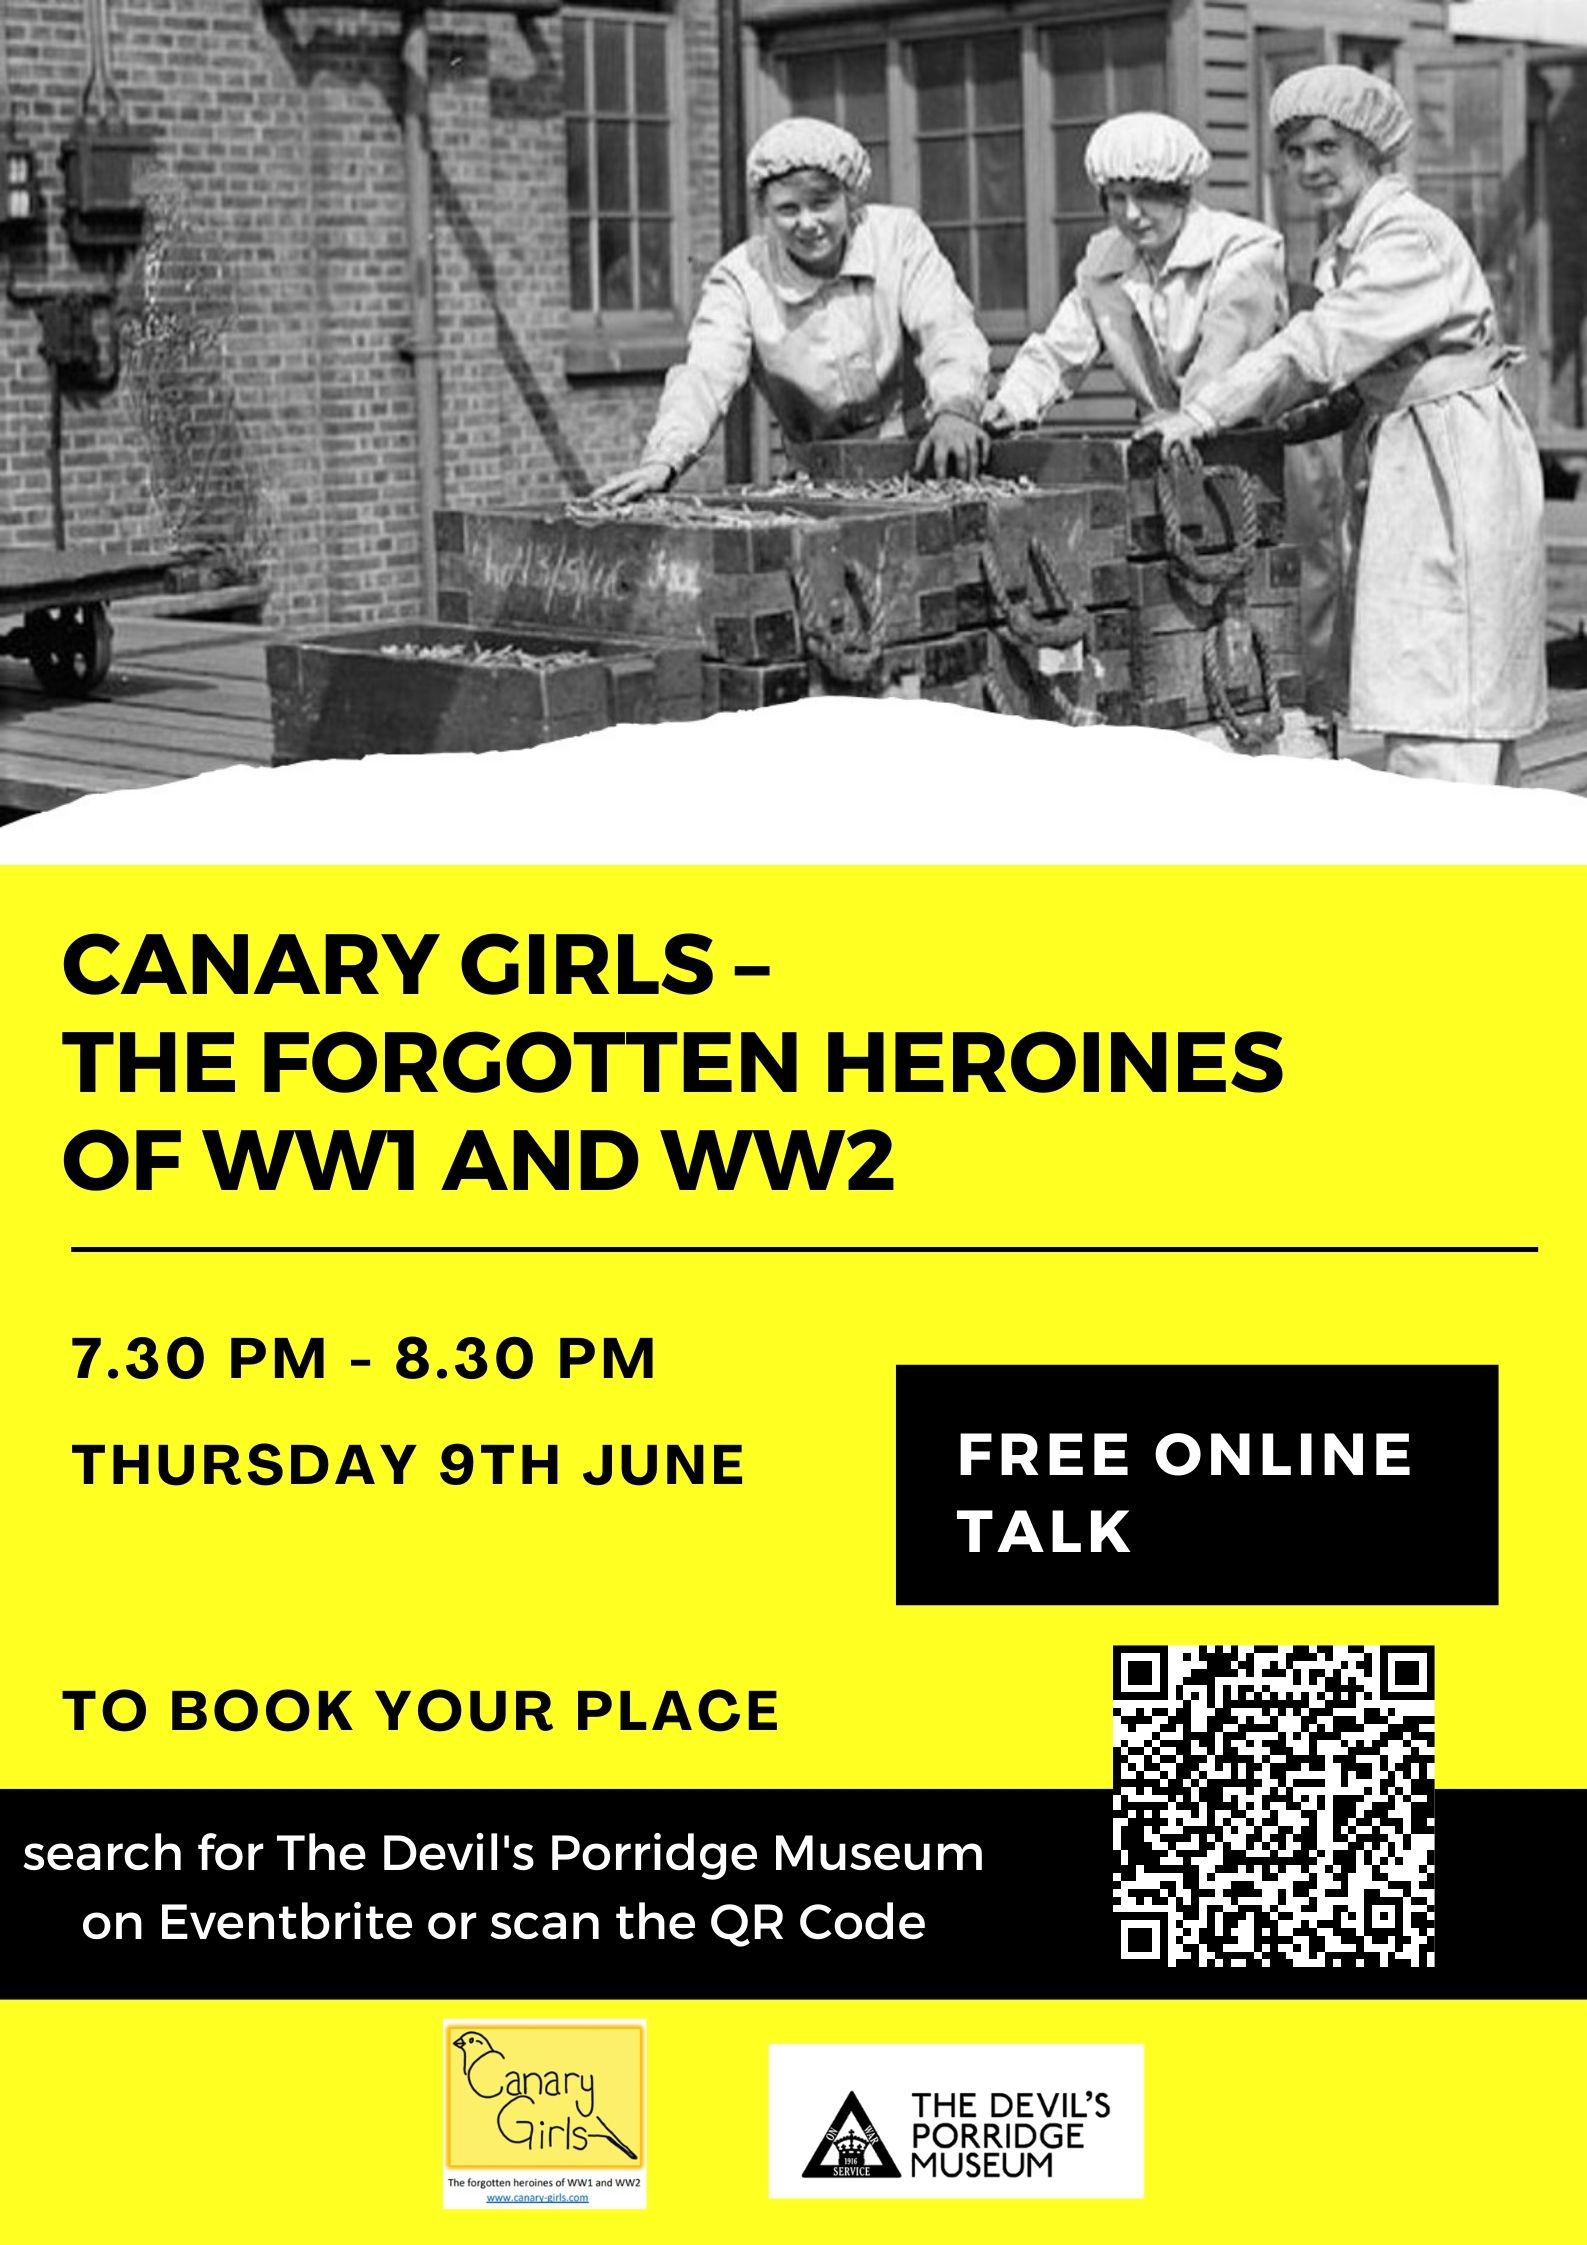 Canary Girls poster for online talk.